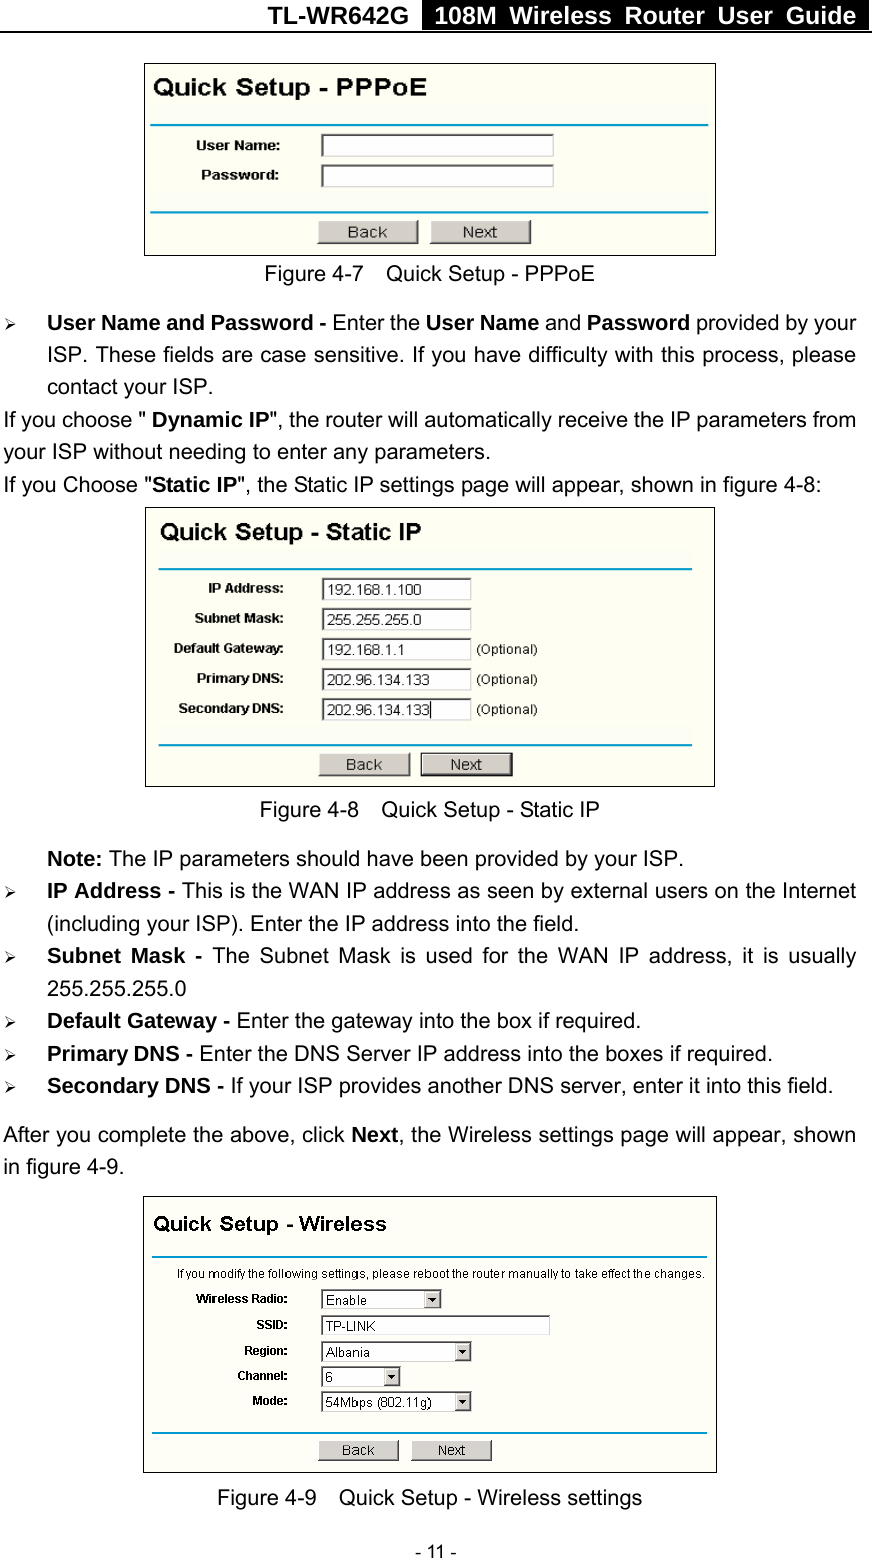 TL-WR642G   108M Wireless Router User Guide   - 11 -  Figure 4-7    Quick Setup - PPPoE ¾ User Name and Password - Enter the User Name and Password provided by your ISP. These fields are case sensitive. If you have difficulty with this process, please contact your ISP. If you choose &quot; Dynamic IP&quot;, the router will automatically receive the IP parameters from your ISP without needing to enter any parameters. If you Choose &quot;Static IP&quot;, the Static IP settings page will appear, shown in figure 4-8:    Figure 4-8    Quick Setup - Static IP  Note: The IP parameters should have been provided by your ISP. ¾ IP Address - This is the WAN IP address as seen by external users on the Internet (including your ISP). Enter the IP address into the field. ¾ Subnet Mask - The Subnet Mask is used for the WAN IP address, it is usually 255.255.255.0 ¾ Default Gateway - Enter the gateway into the box if required. ¾ Primary DNS - Enter the DNS Server IP address into the boxes if required. ¾ Secondary DNS - If your ISP provides another DNS server, enter it into this field. After you complete the above, click Next, the Wireless settings page will appear, shown in figure 4-9.  Figure 4-9    Quick Setup - Wireless settings 